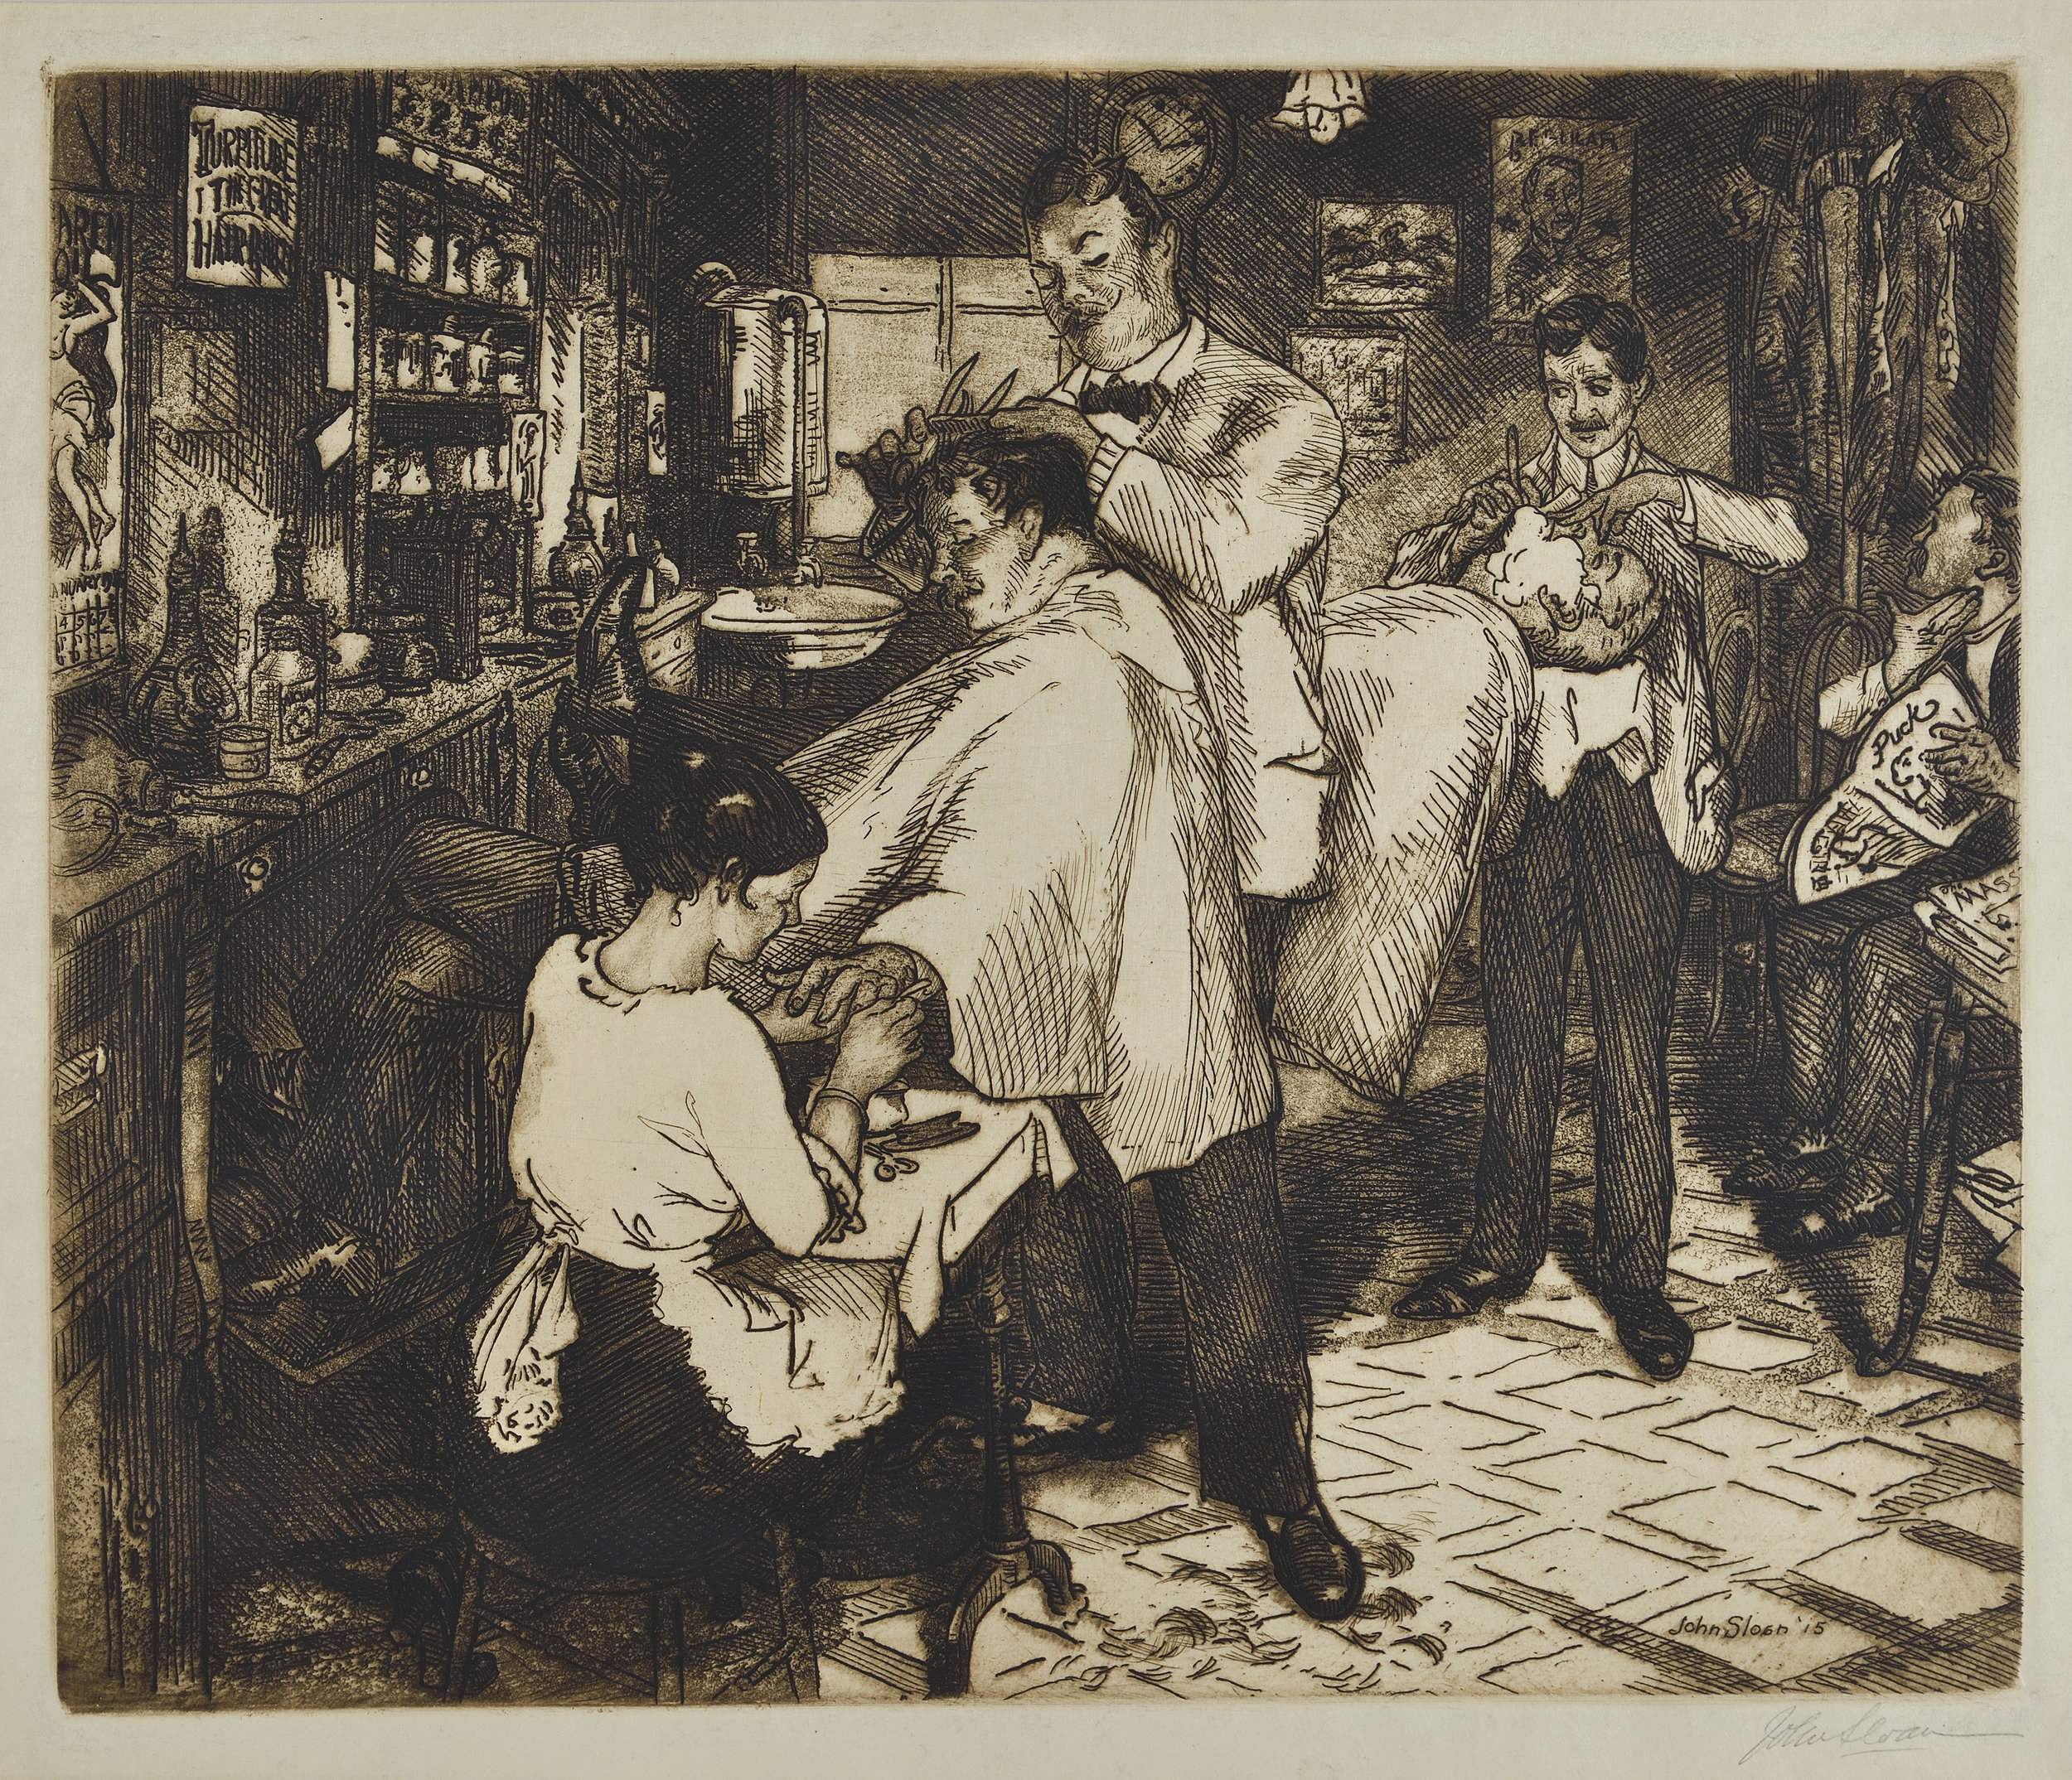 Etching of man getting a haircut at a barbershop and having his nails done. In the background a man is having a shave and a man is waiting for his appointment